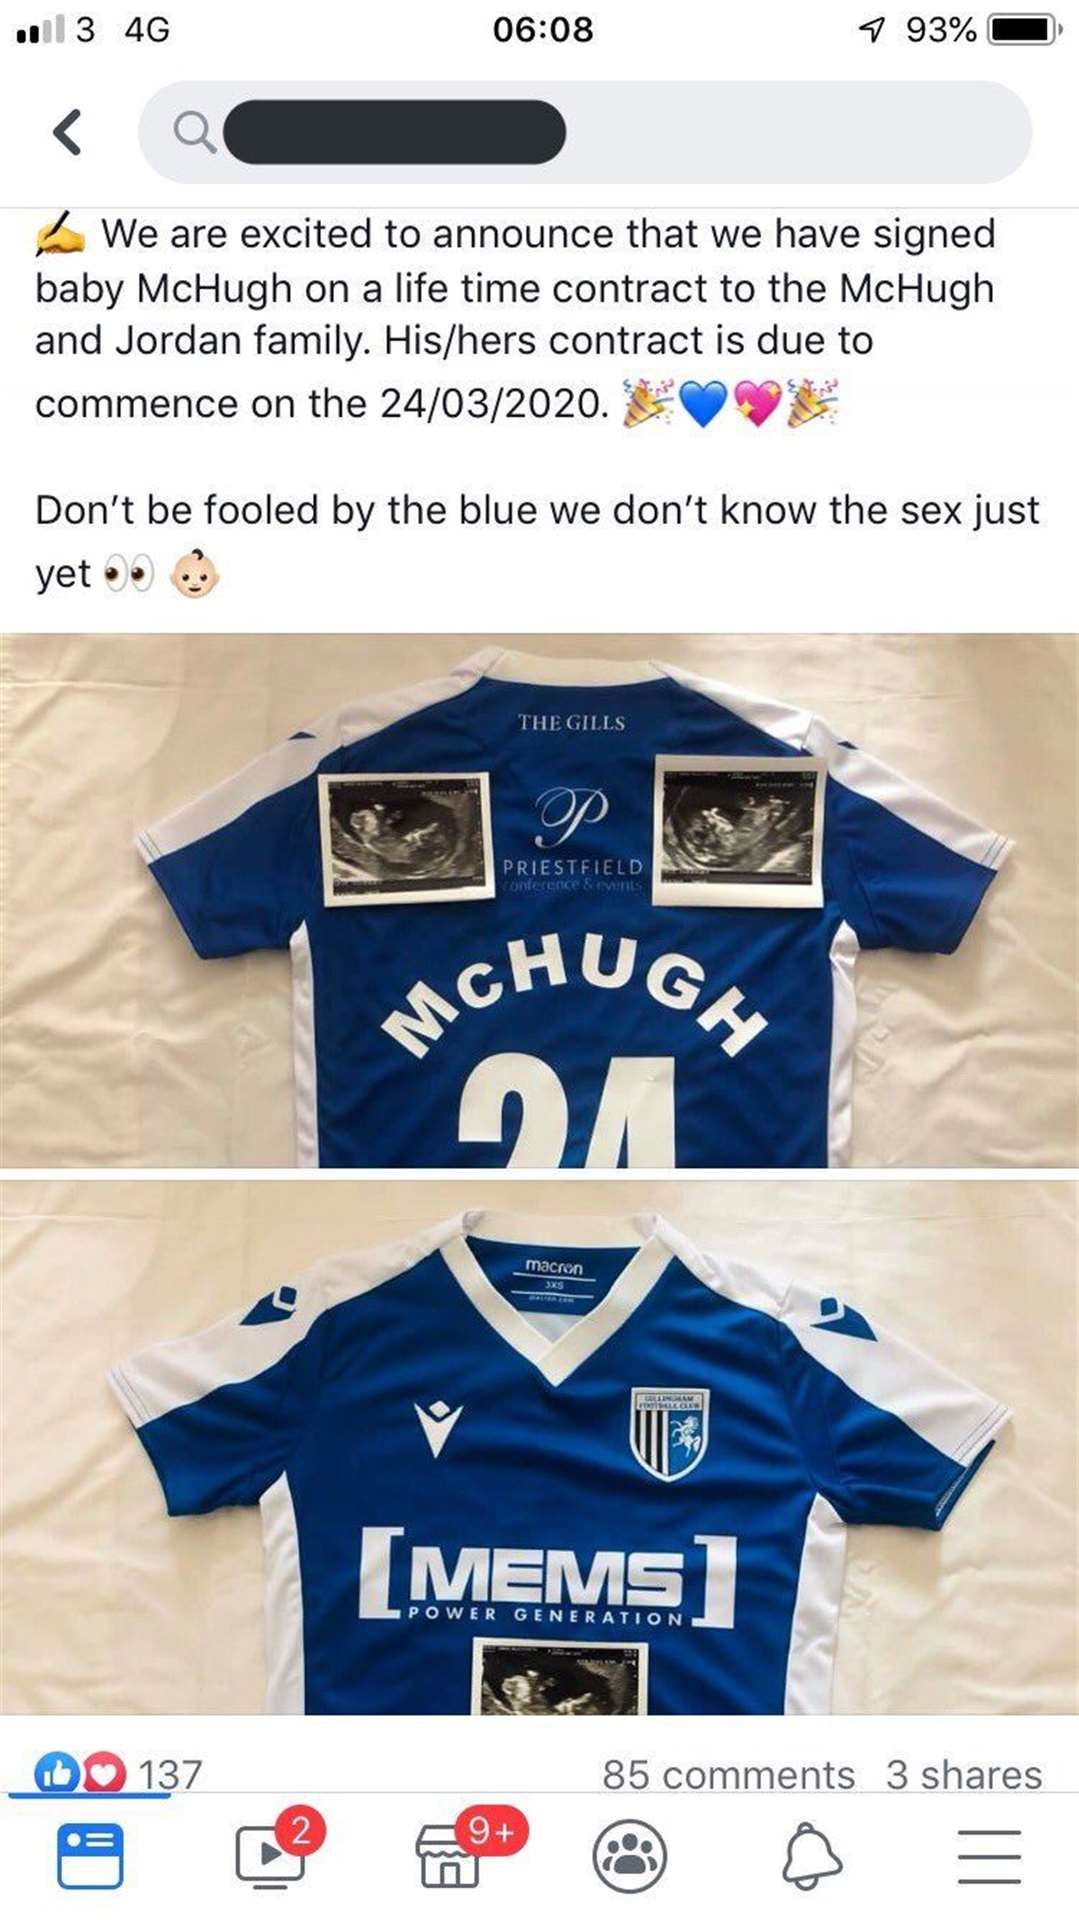 Sean McHugh used an innovative way of announcing he and his partner Amy were expecting a baby. Picture: Amy Jordan